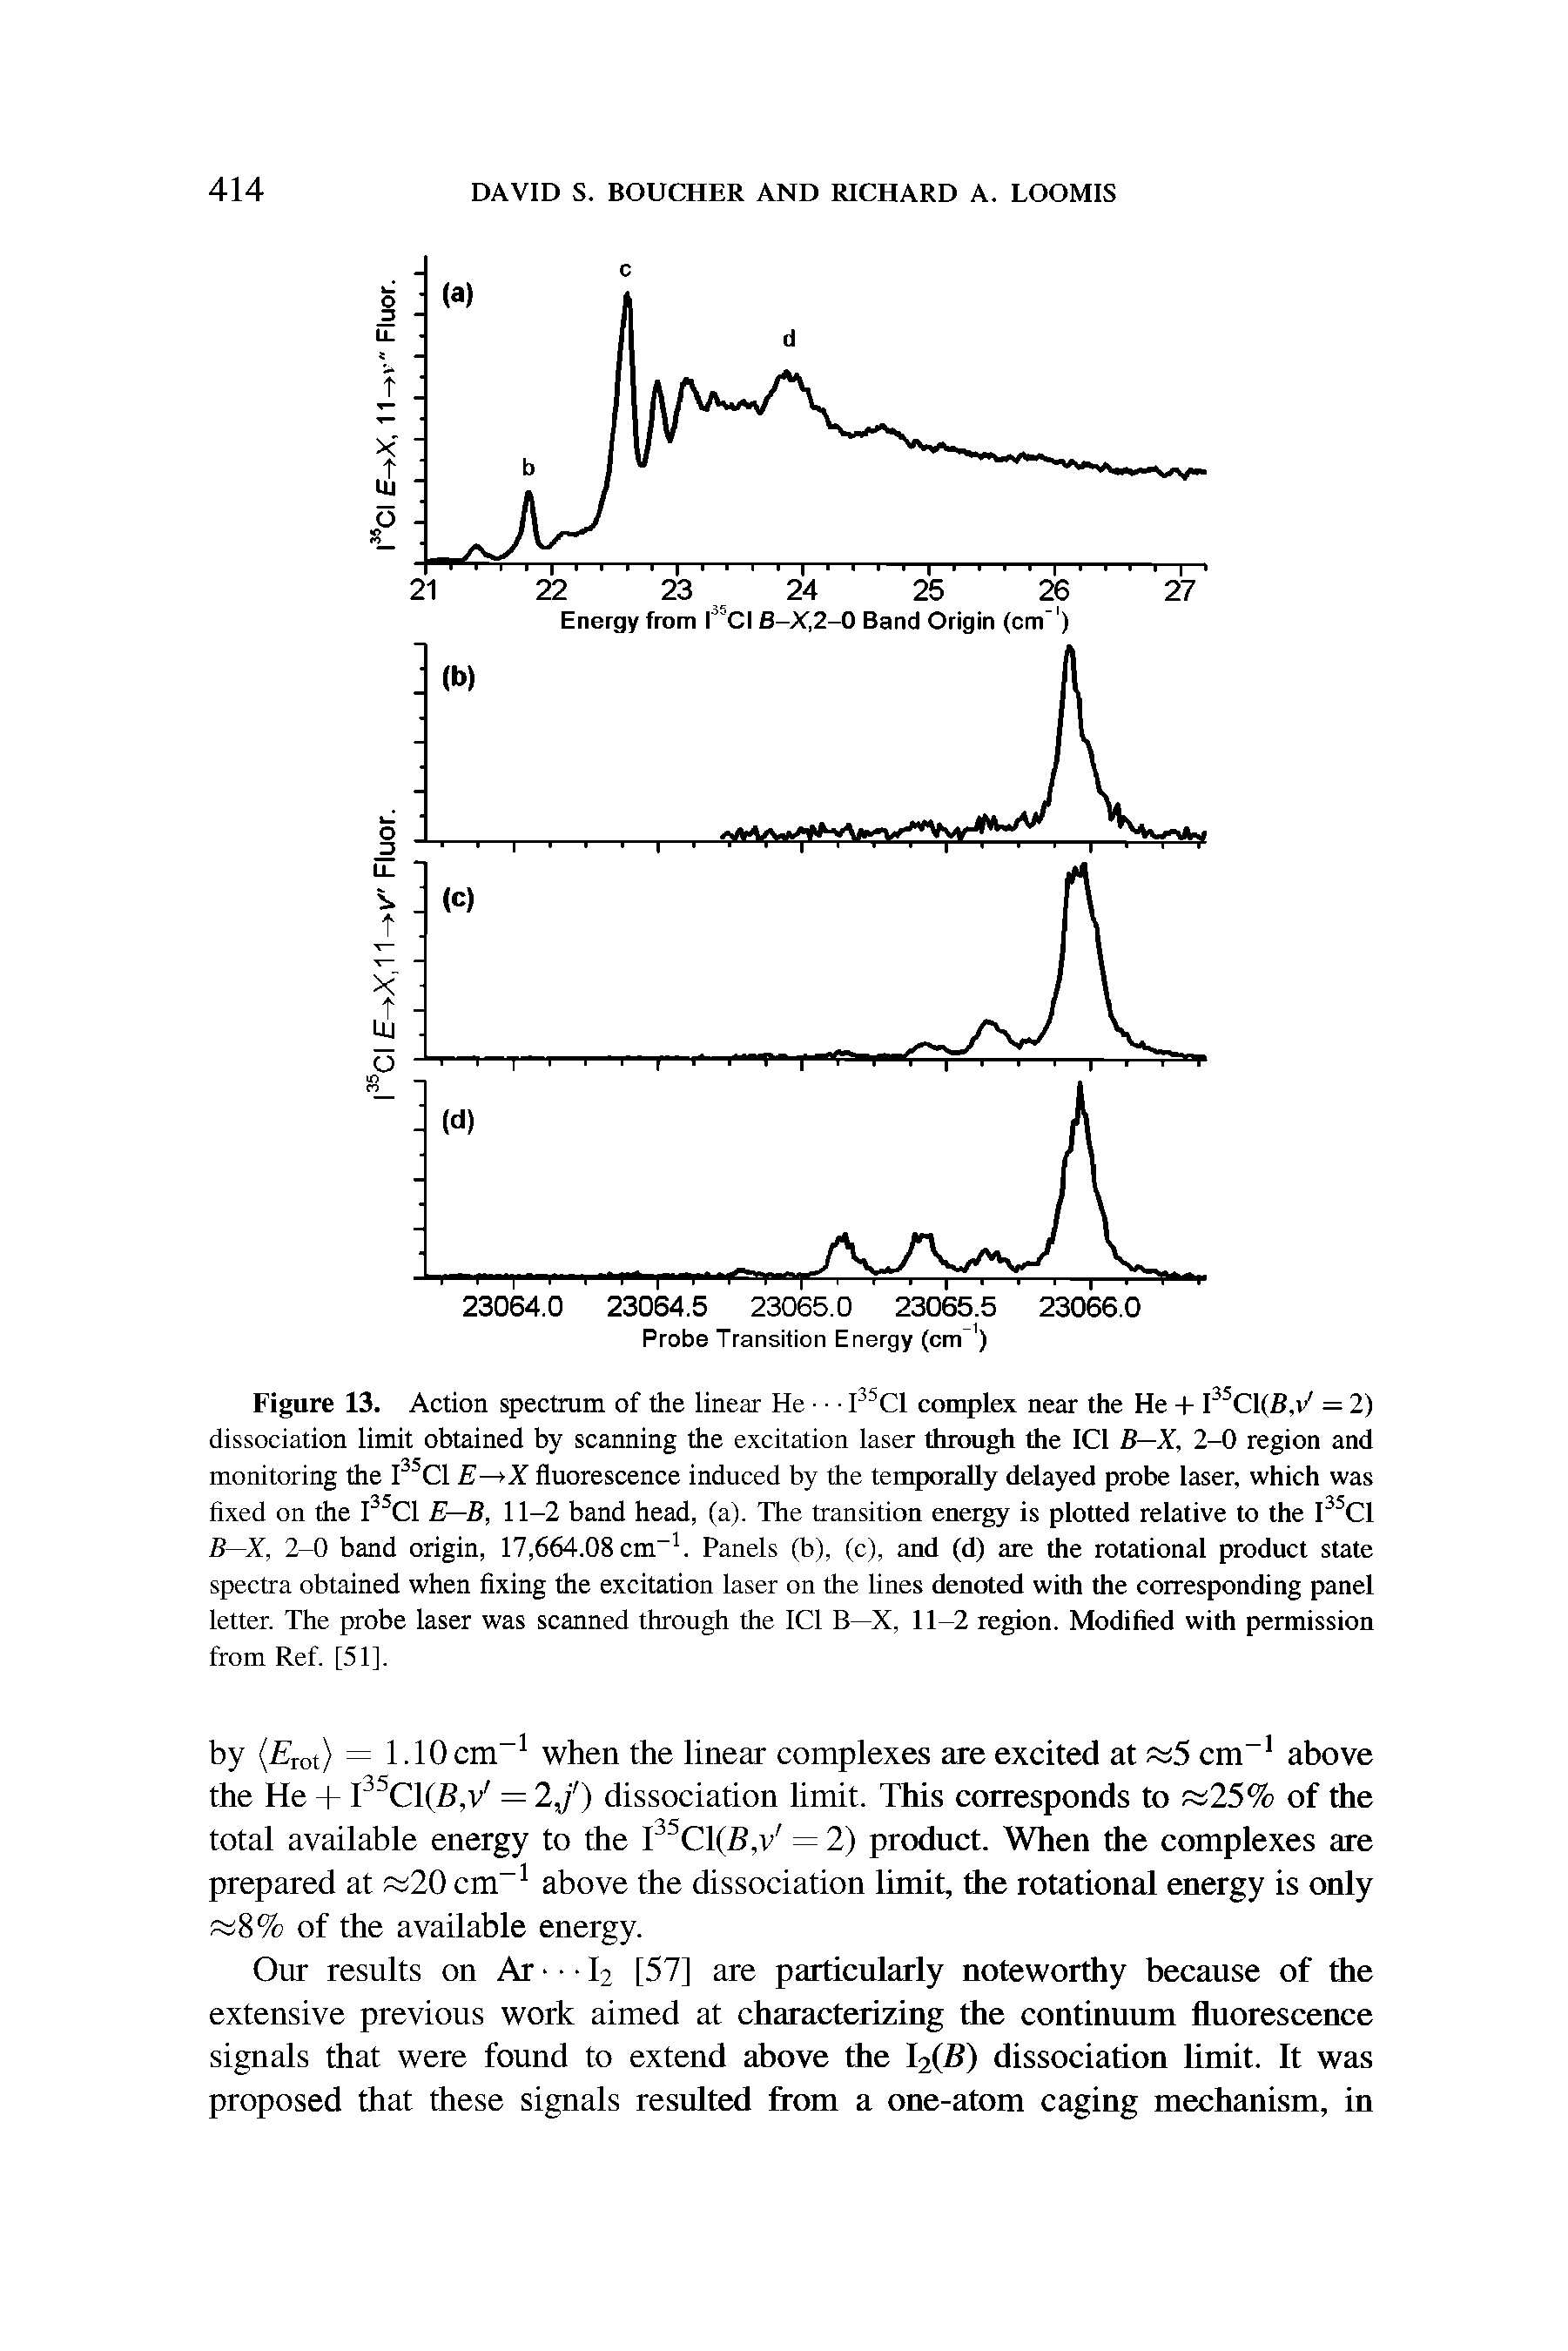 Figure 13. Action spectrum of the linear He I Cl complex near the He + I Cl(By = 2) dissociation limit obtained by scanning the excitation laser through the ICl B—X, 2-0 region and monitoring the l Cl E—>X fluorescence induced by the temporally delayed probe laser, which was fixed on the l Cl E—B, 11-2 band head, (a). The transition energy is plotted relative to the I Cl B—X, 2-0 band origin, 17,664.08 cm . Panels (b), (c), and (d) are the rotational product state spectra obtained when fixing the excitation laser on the lines denoted with the corresponding panel letter. The probe laser was scanned through the ICl B—X, 11-2 region. Modified with permission from Ref. [51].